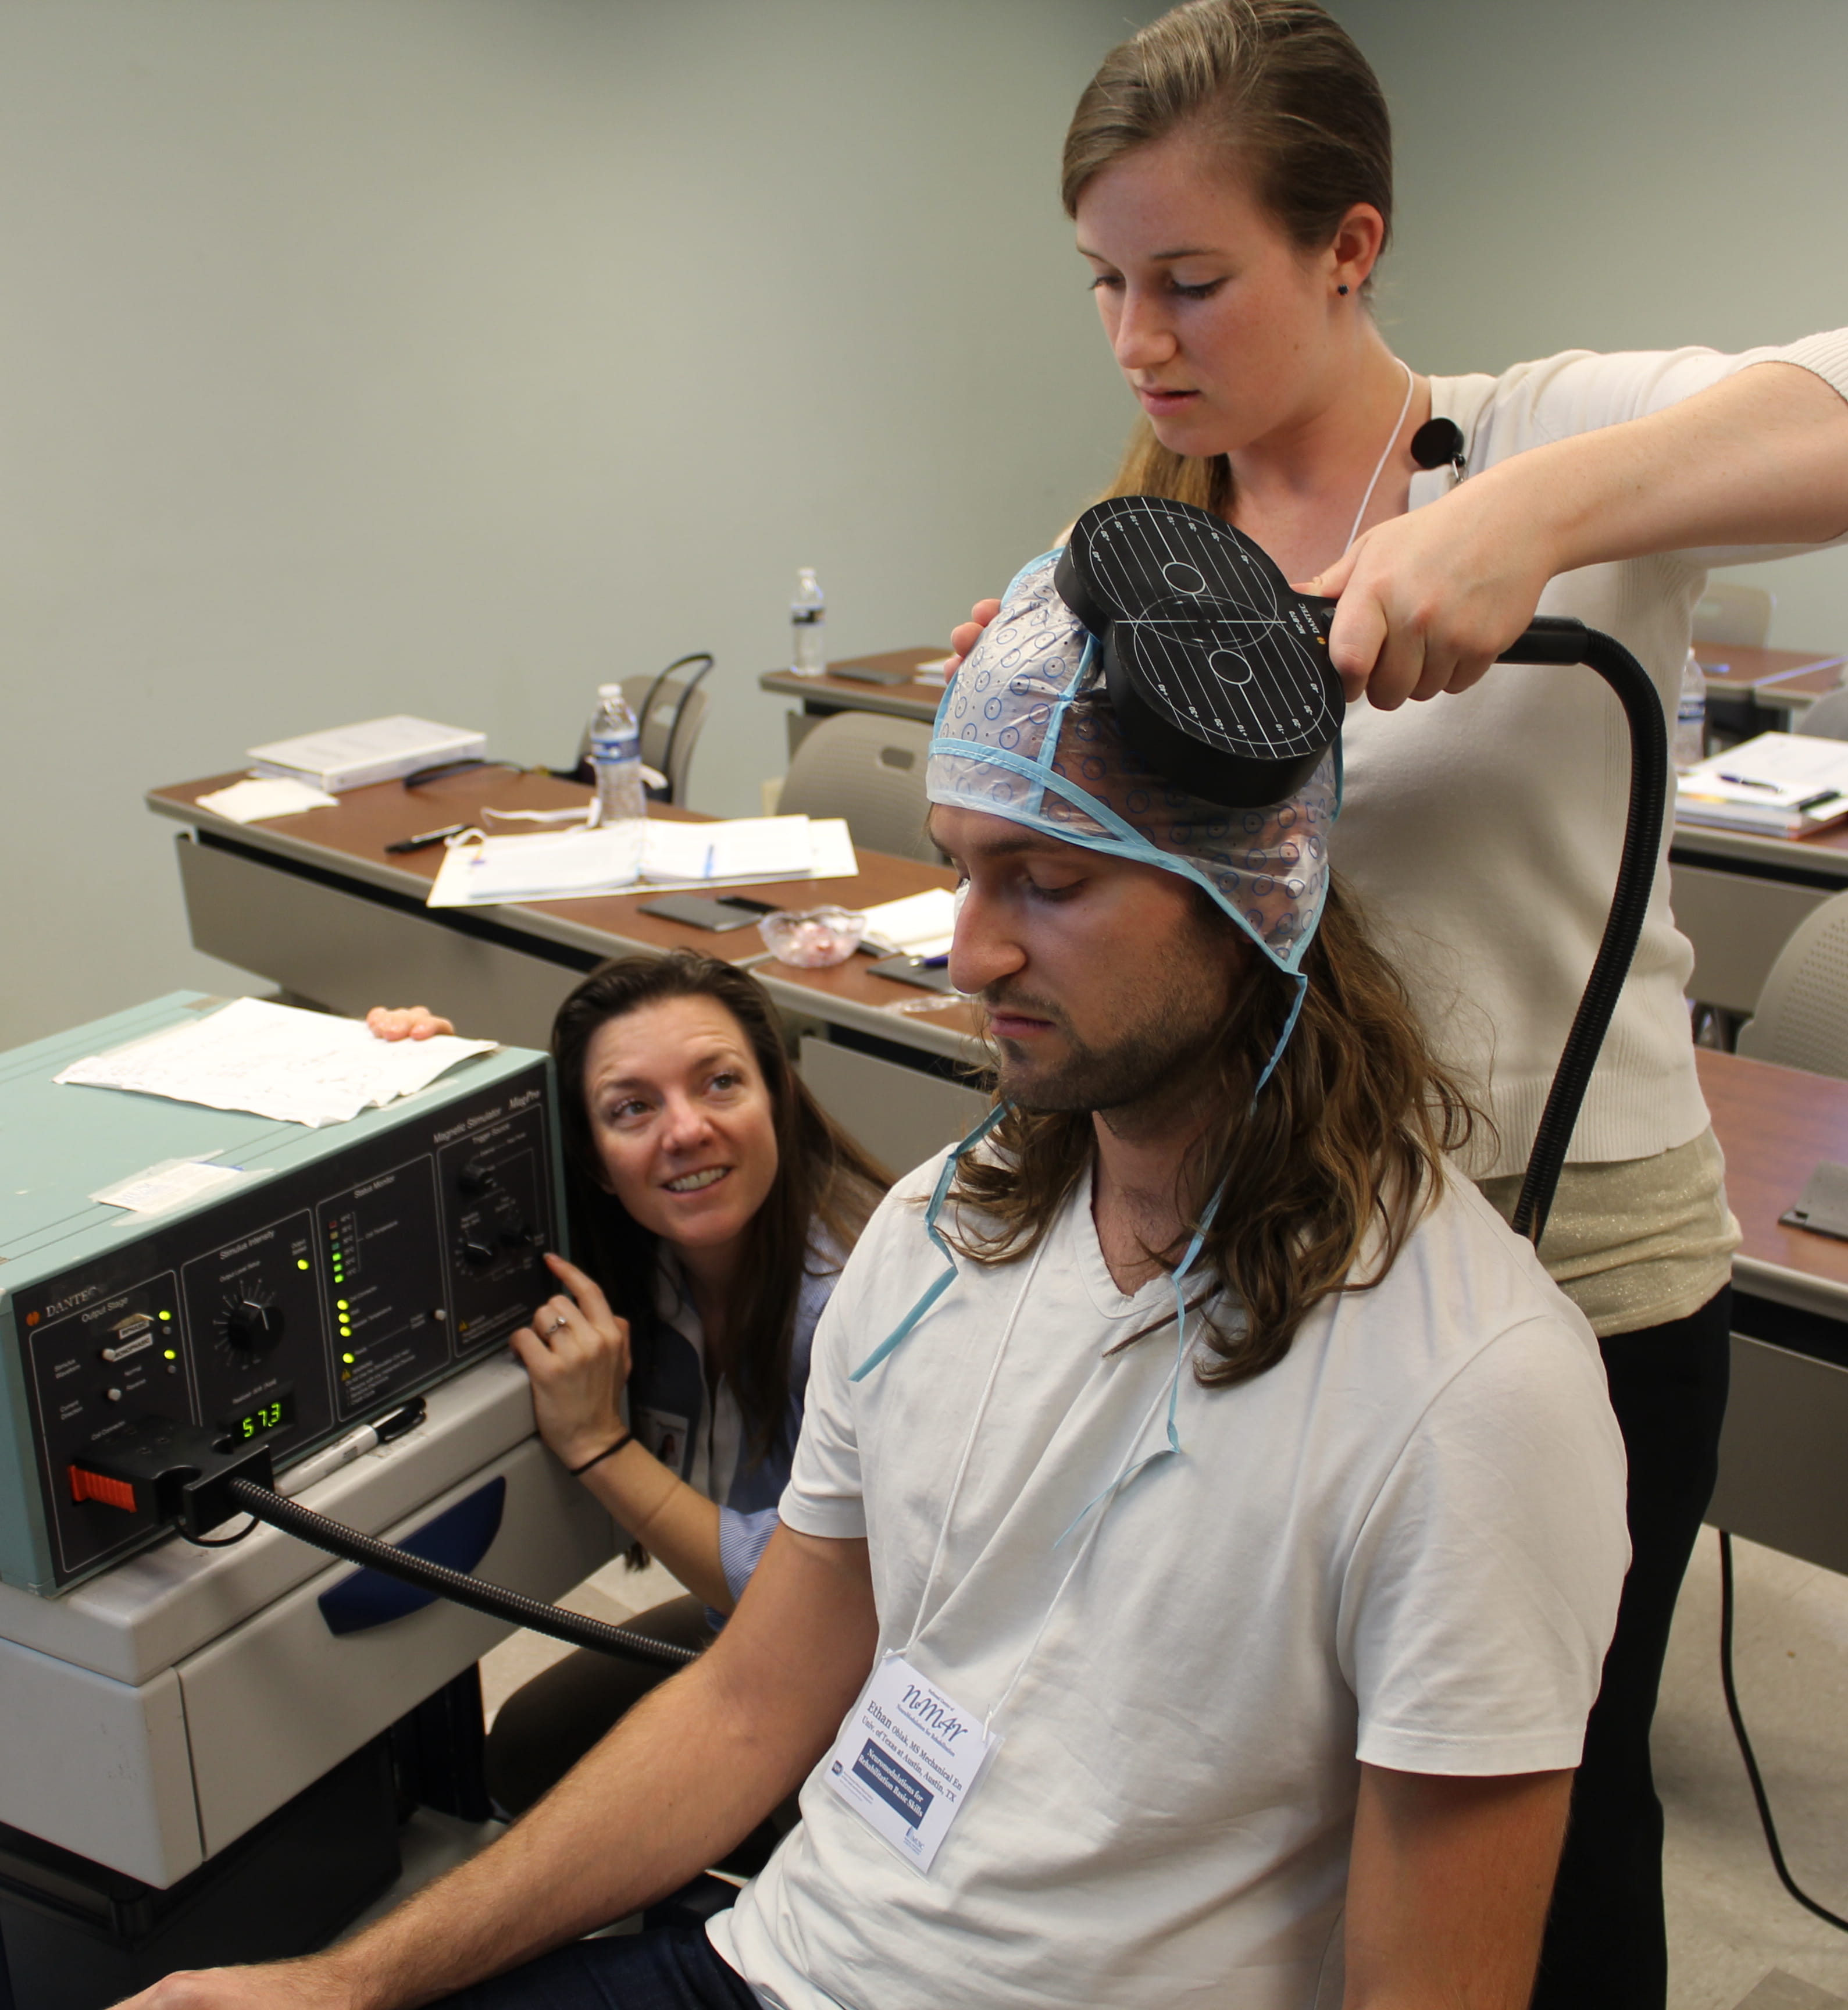 Training attendees in using transcranial magnetic stimulation during the introductory workshop.